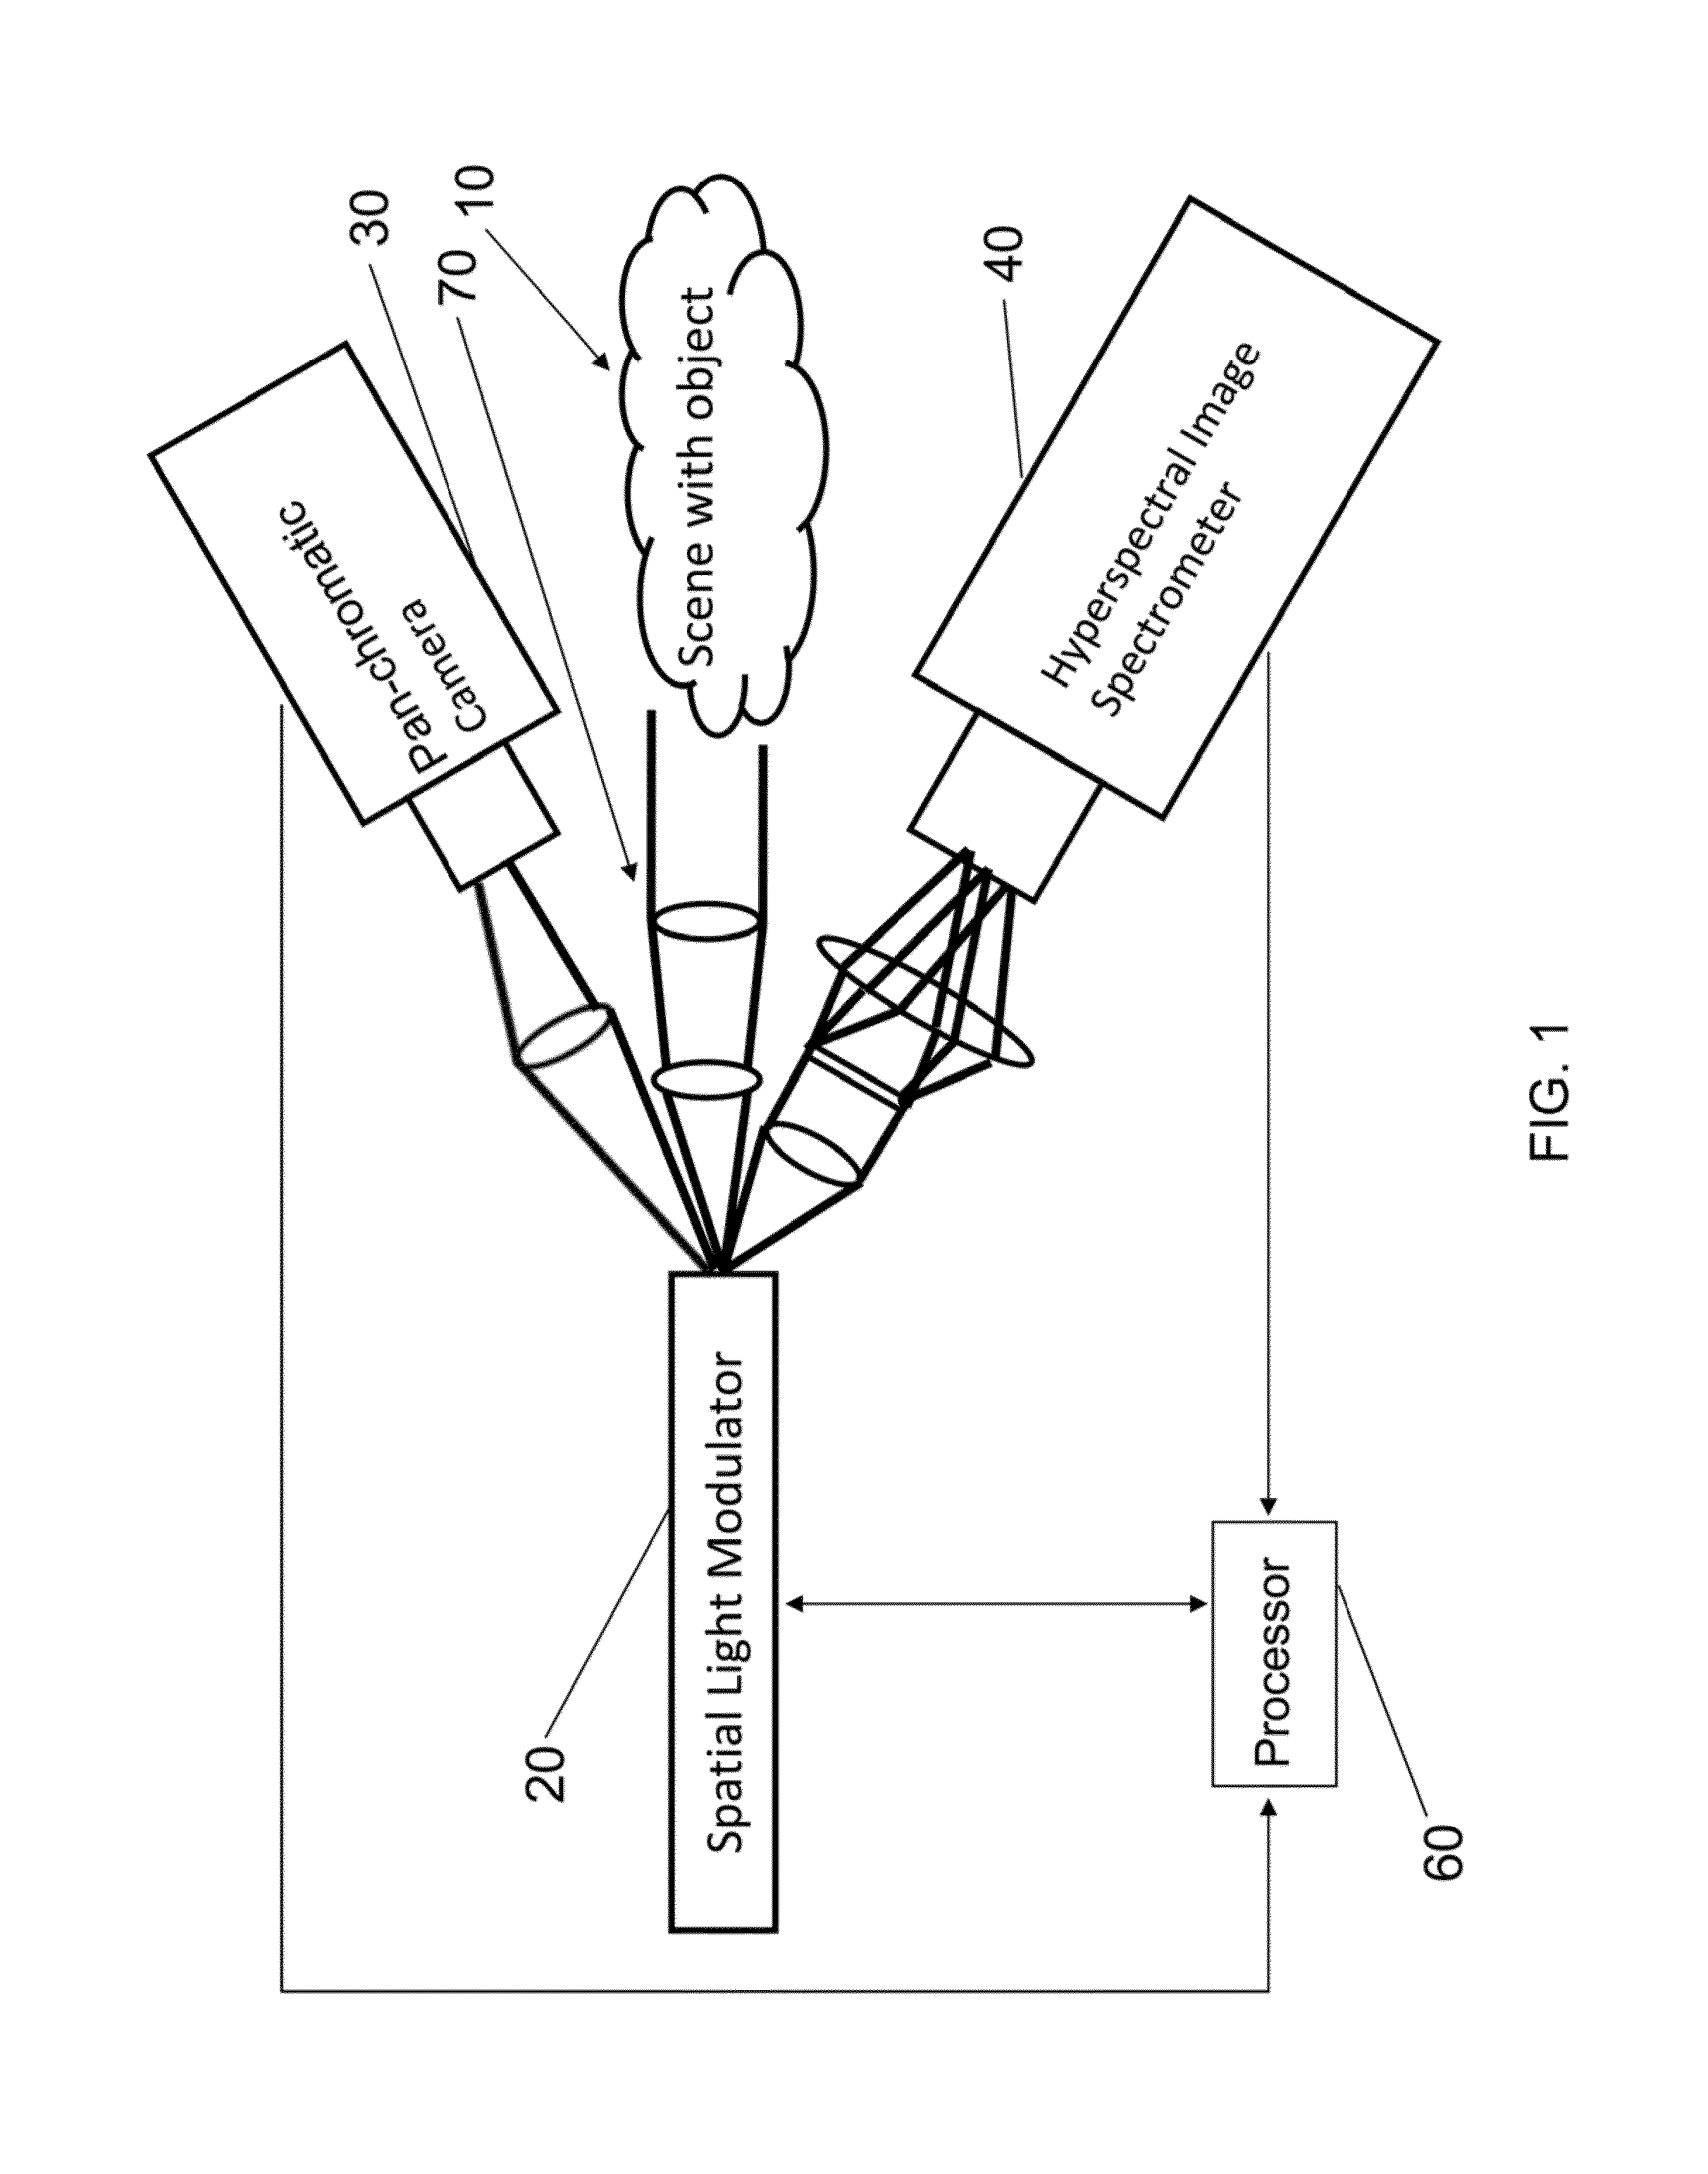 Agile interrogation hyperspectral imager and method of using same